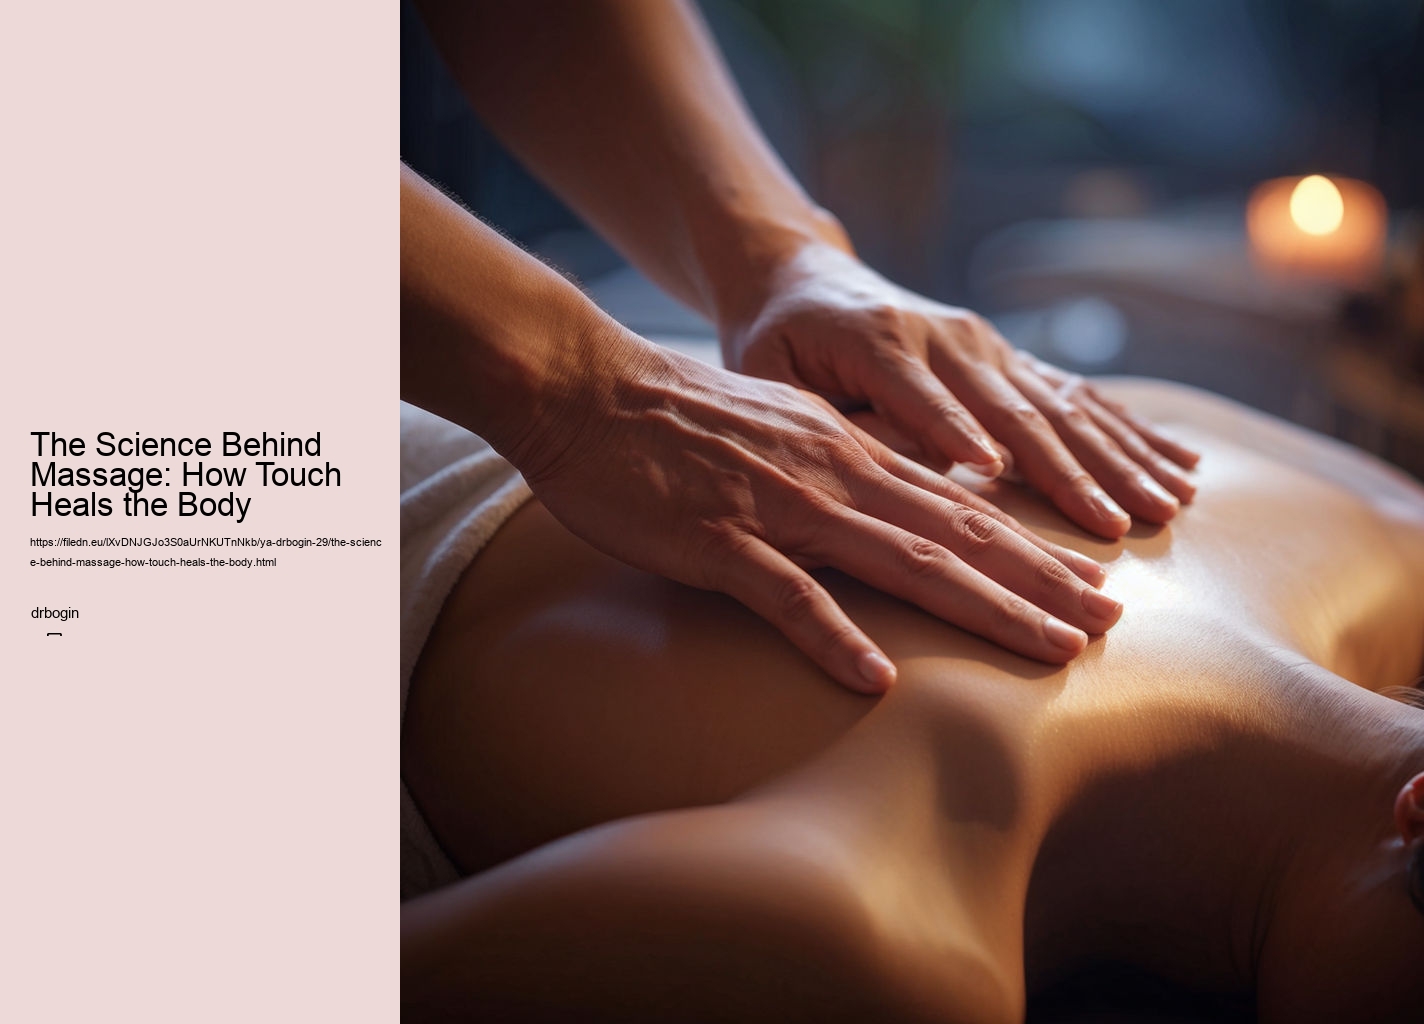 The Science Behind Massage: How Touch Heals the Body